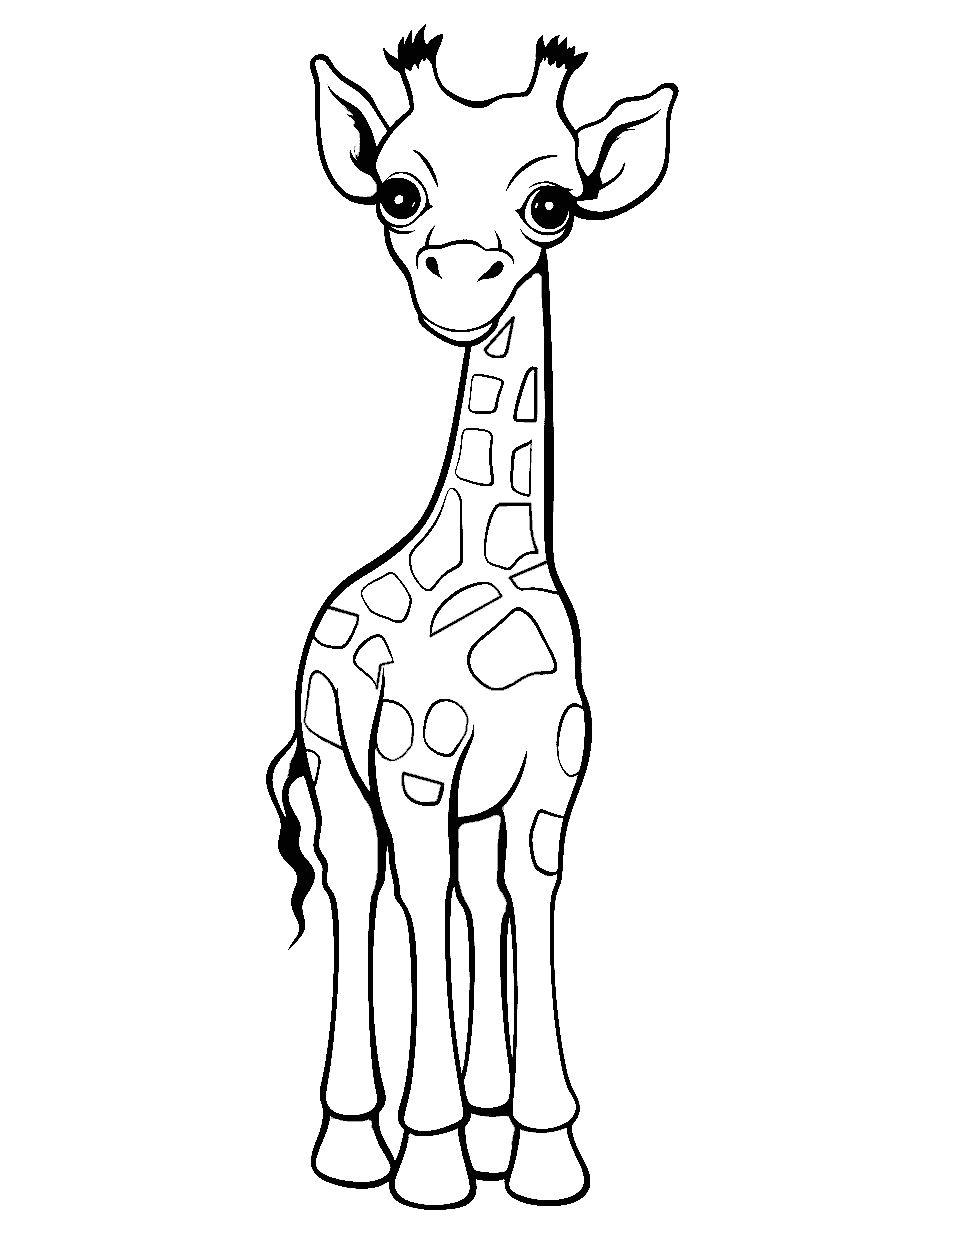 Cute Baby Giraffe Coloring Page - A cute baby giraffe with big eyes looking curious.